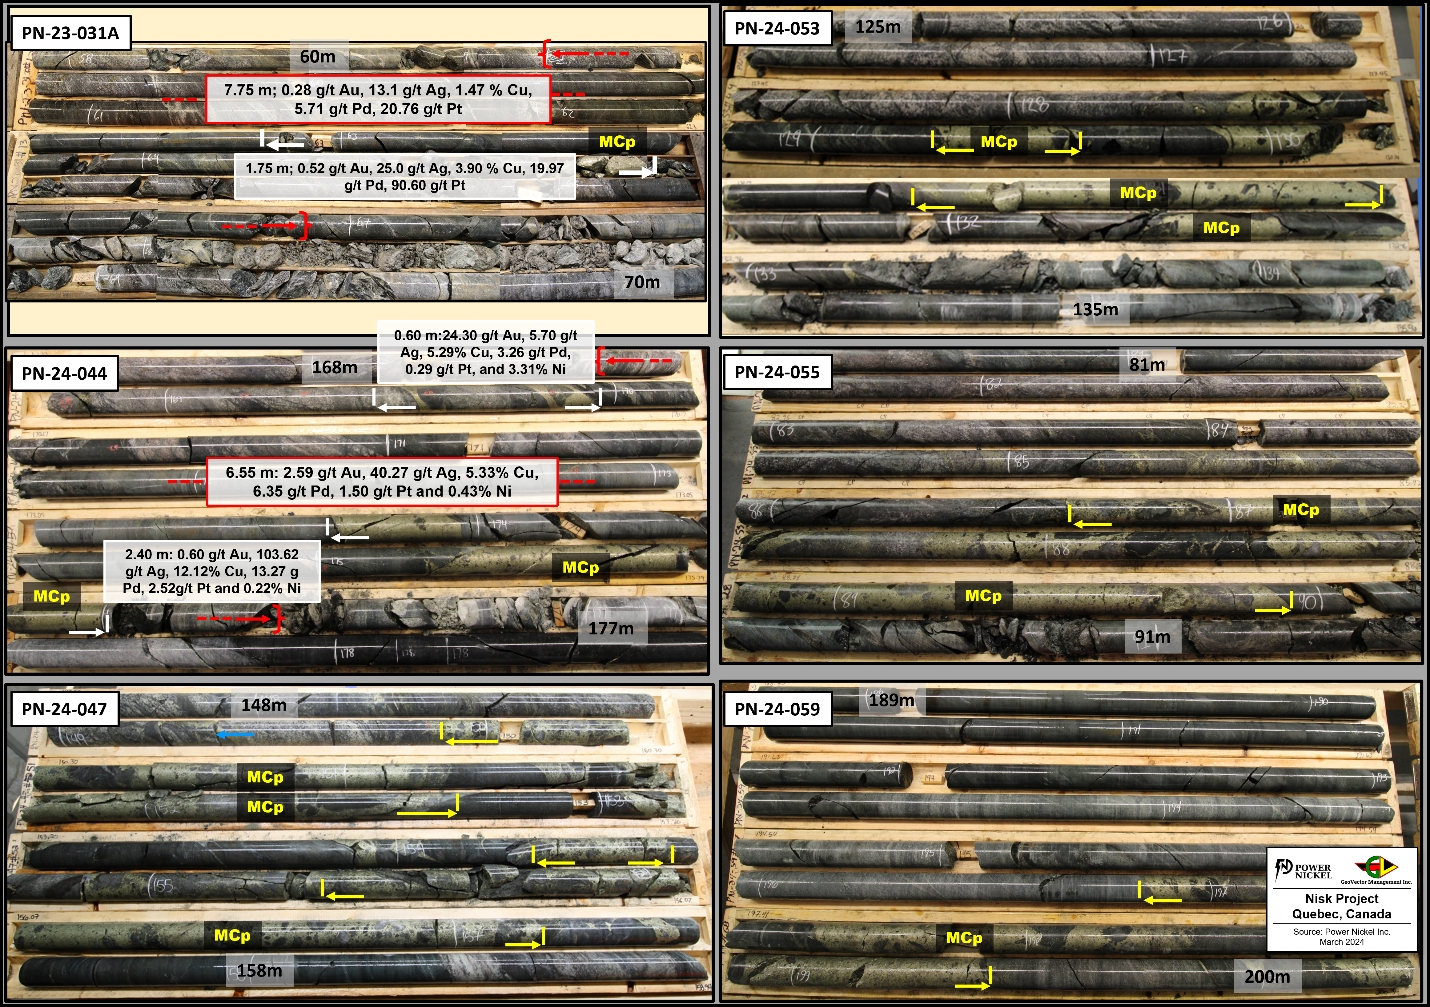 Core pictures showing the relation between observed massive chalcopyrite and grade in both PN-23-031A and PN-24-044, and massive chalcopyrite (MCp) observed in four other recent holes.